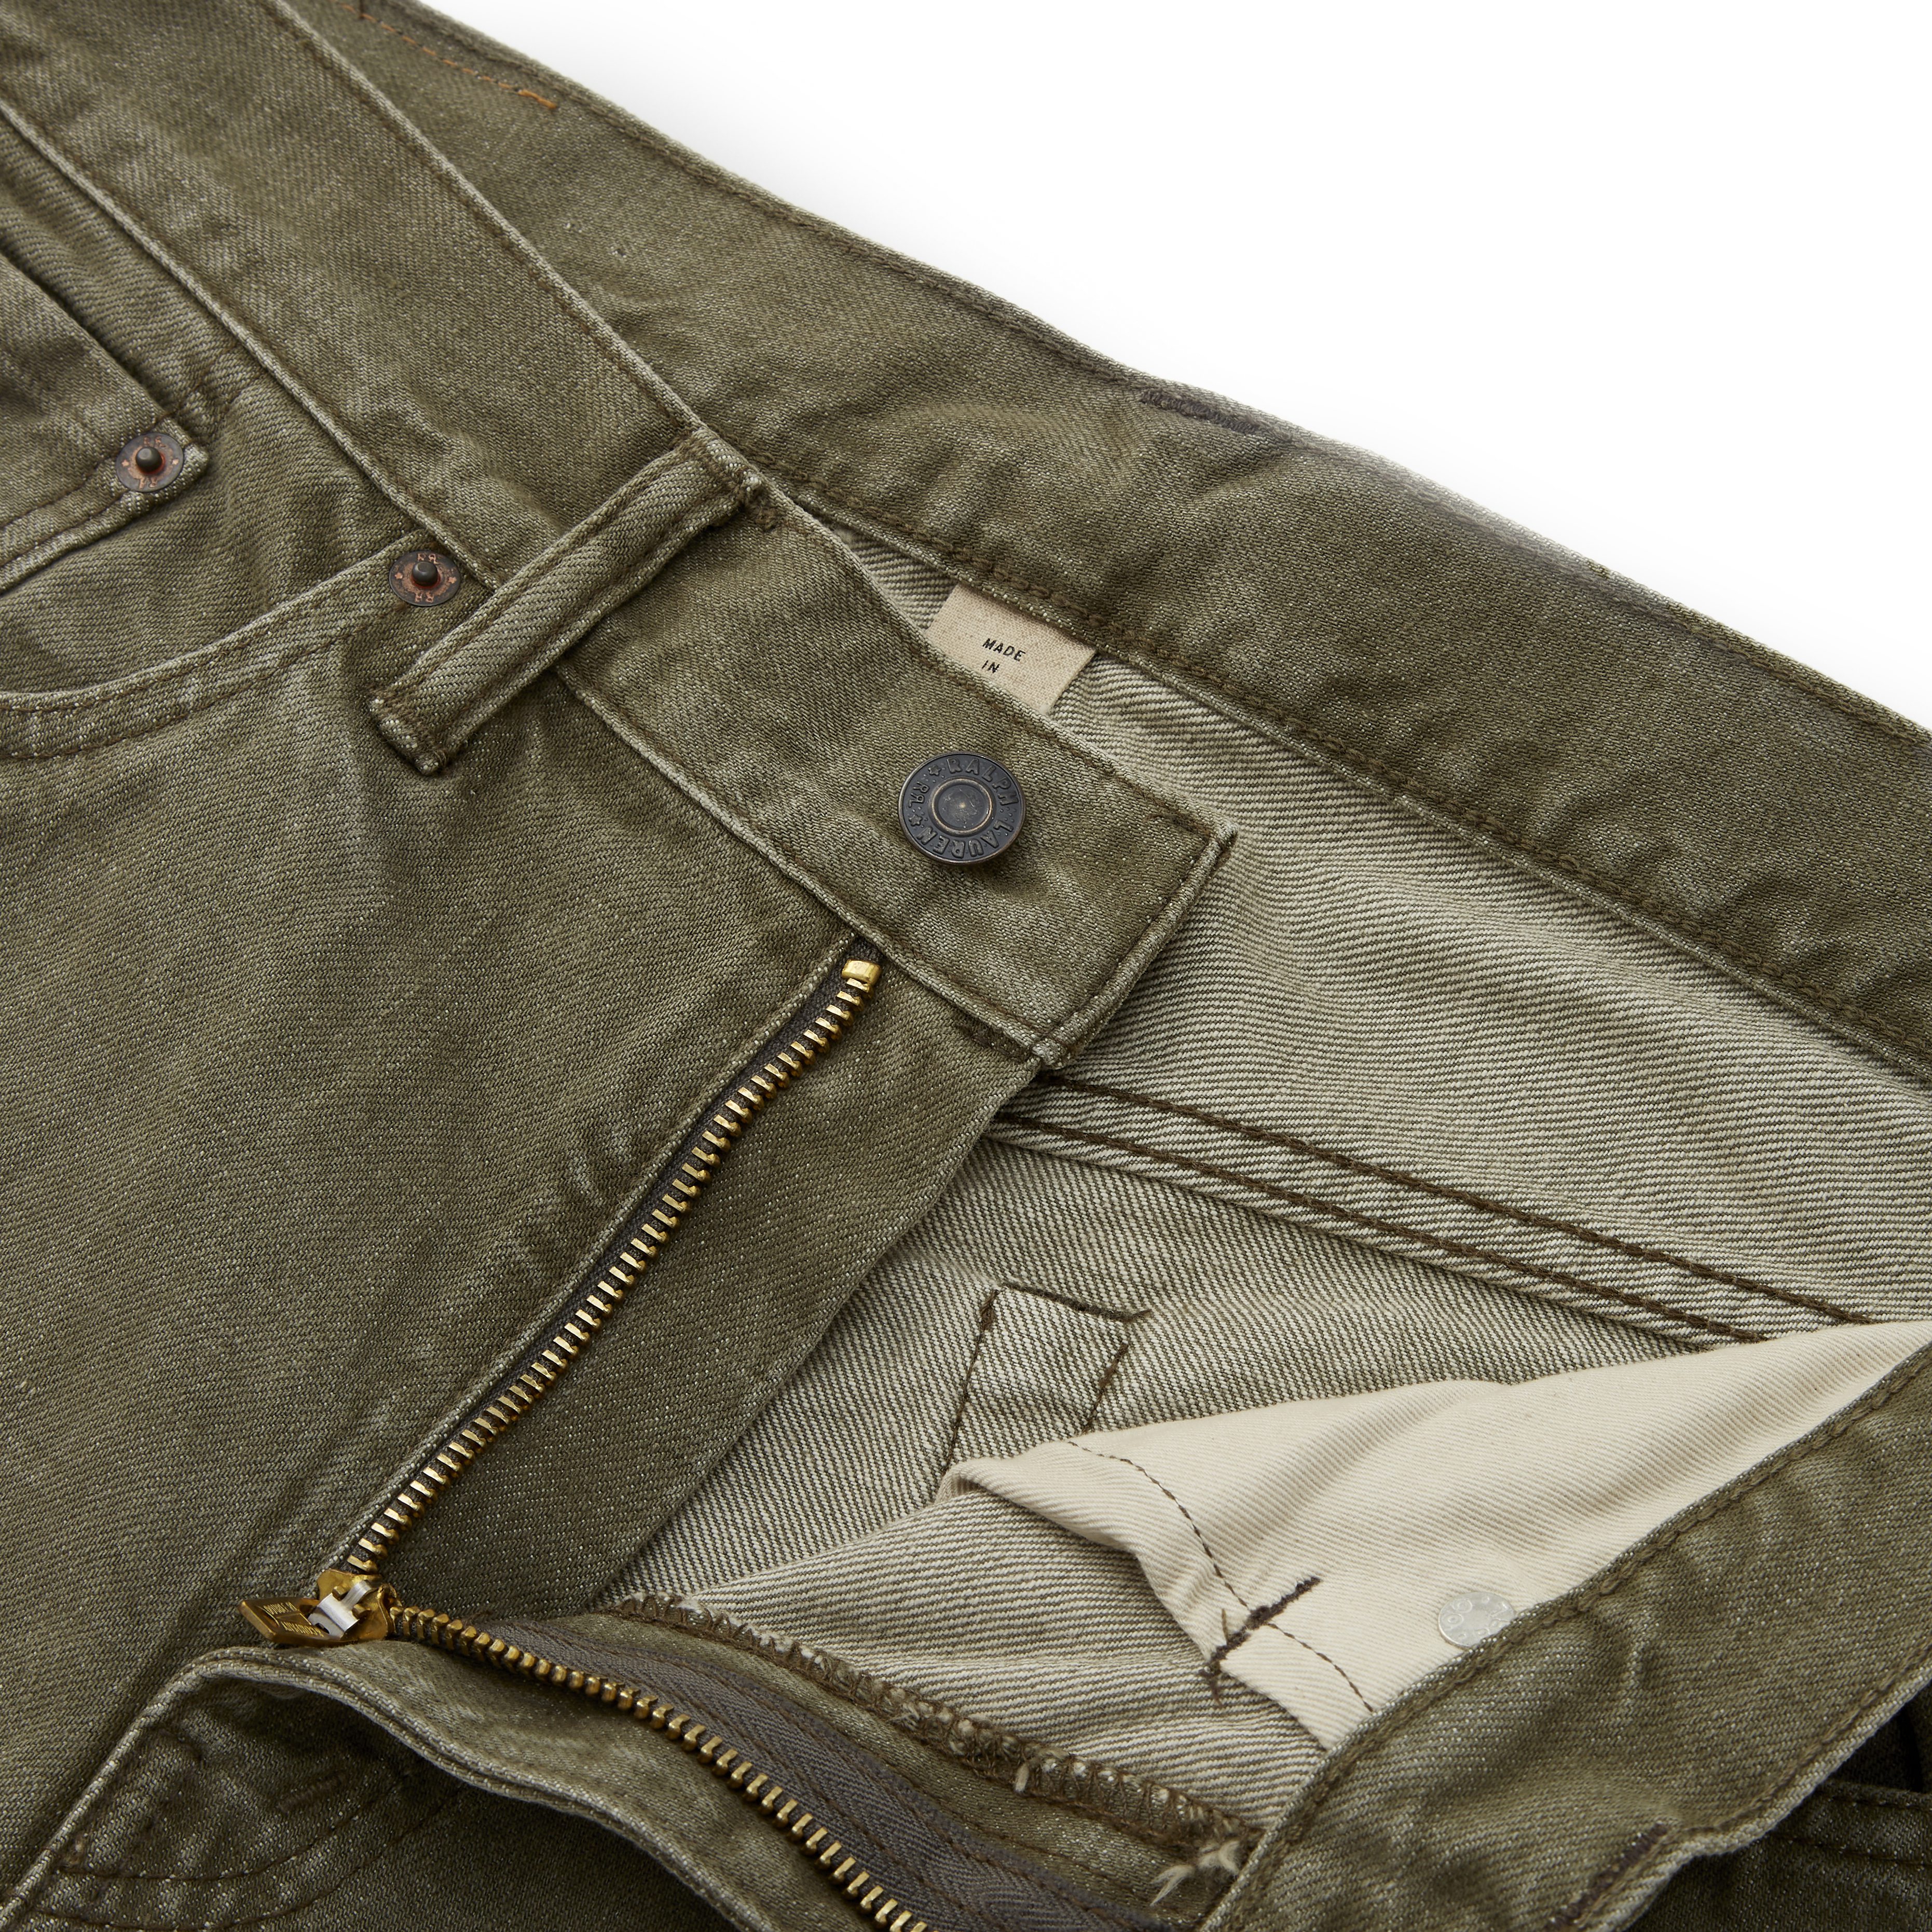 Style Pick of the Week: RRL Slim Fit Selvedge Denim – A